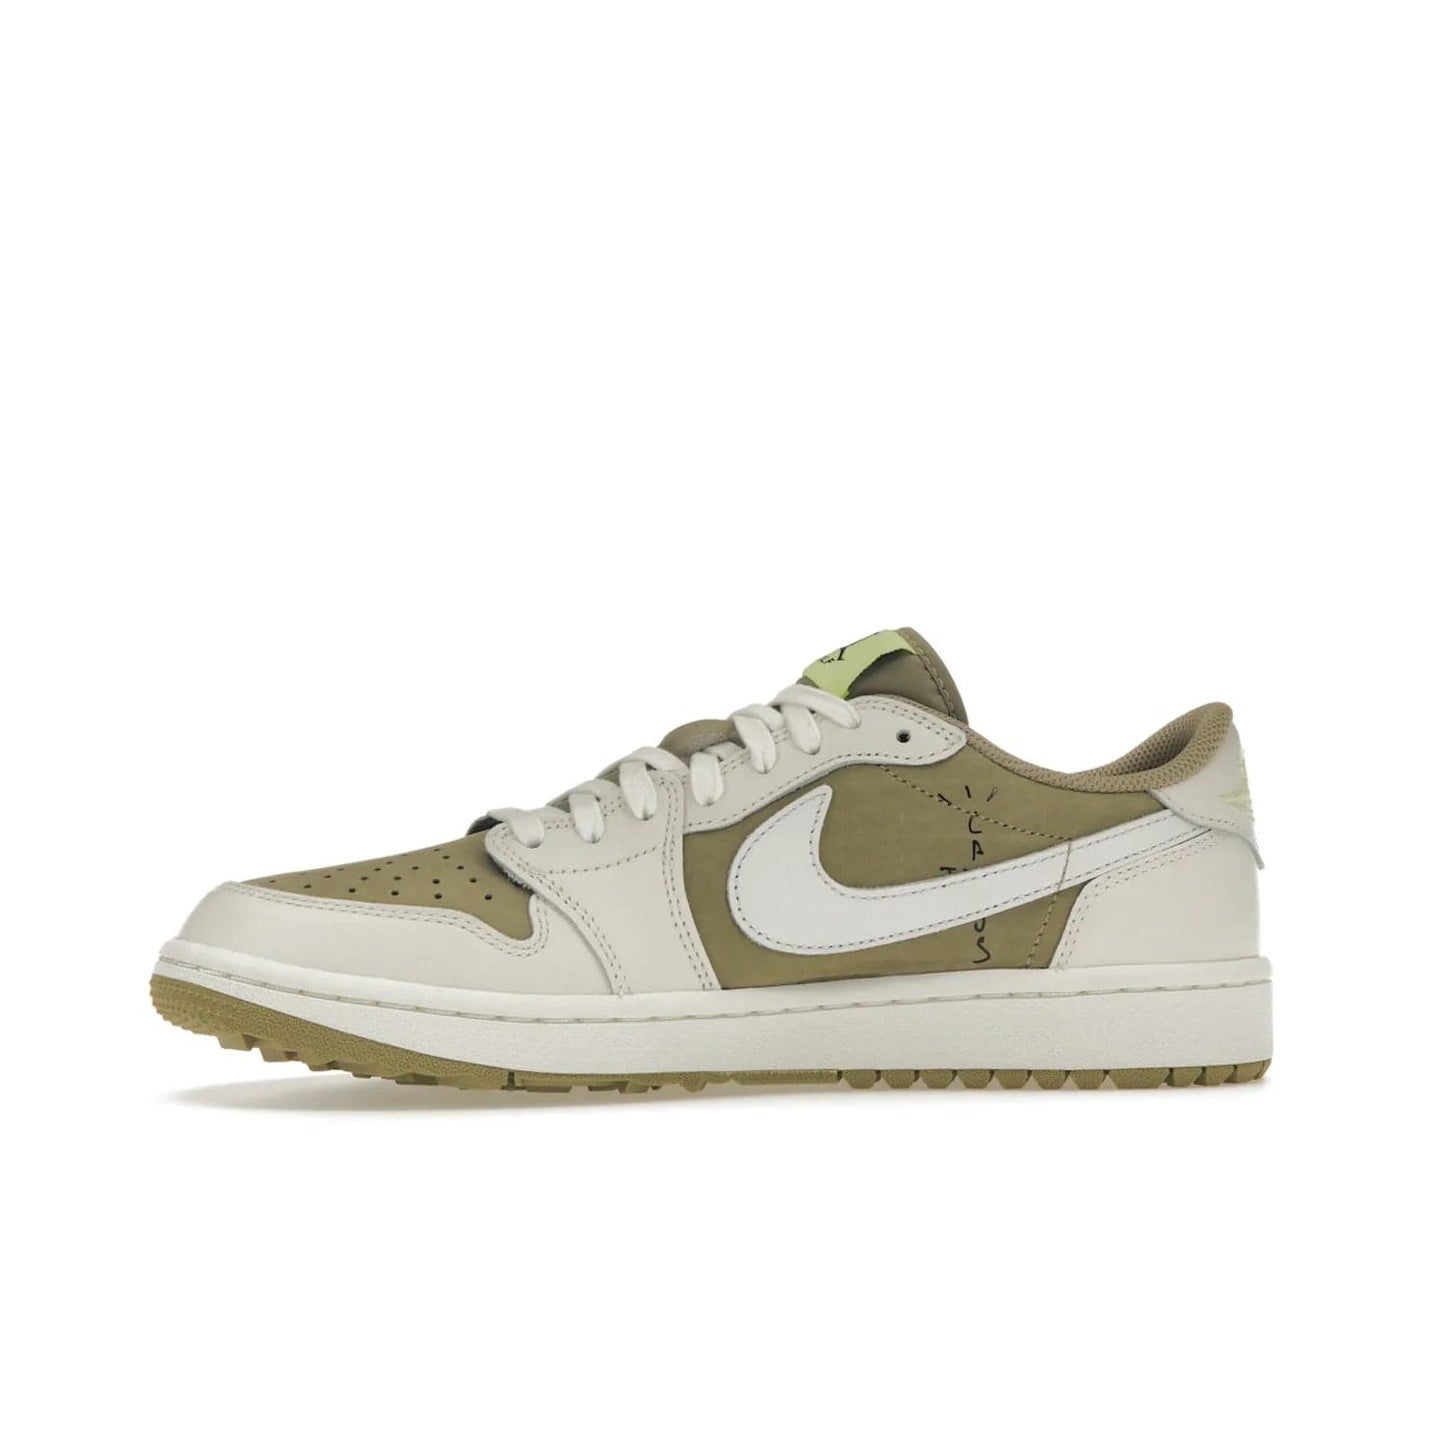 Jordan 1 Retro Low Golf Travis Scott Neutral Olive - Image 18 - Only at www.BallersClubKickz.com - Explore the unique Jordan 1 Retro Low Golf Travis Scott Neutral Olive, an olive-green sneaker collaboration between the iconic Jordan Brand and music royalty, Travis Scott. This special pair is tailored for the golf course with altered traction, hardened rubber, and a sleek style perfect for everyday wear. Get your pair and impress the crowd with its signature earth tones.